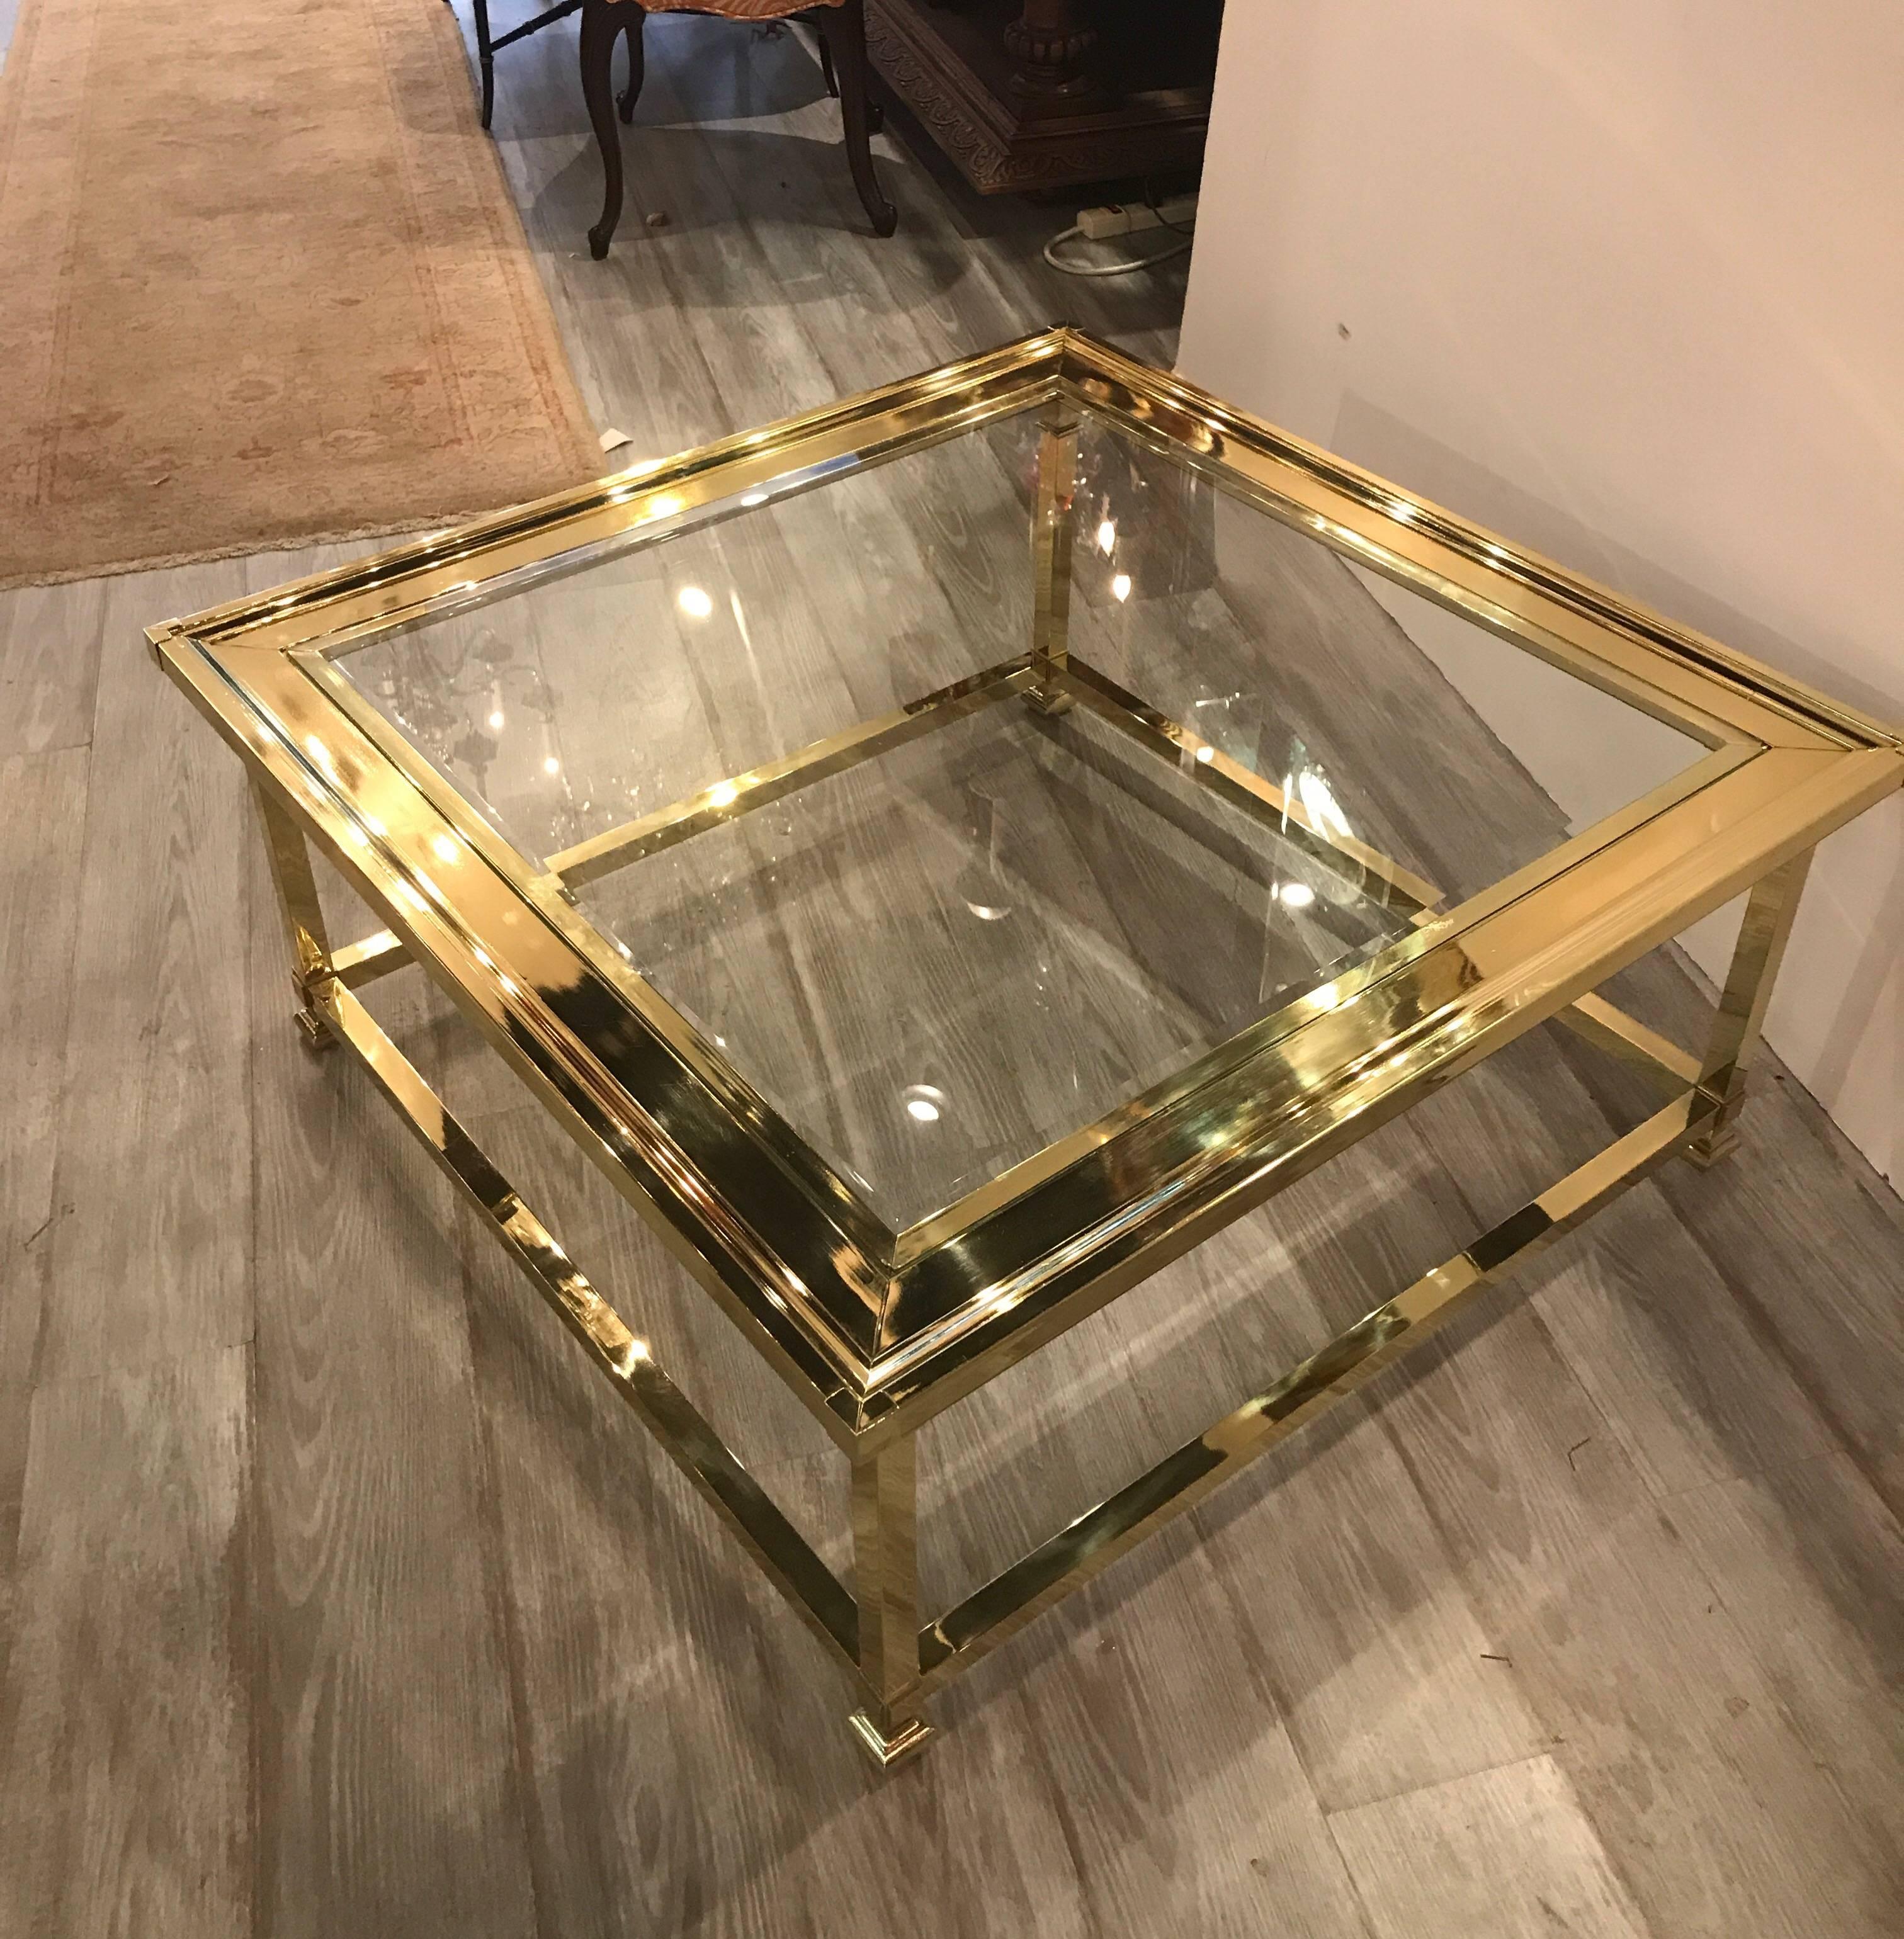 High style bevelled glass and polished brass cocktail table by Mastercraft. The sturdy polished brass base with original bevelled glass top. A rare and hard to find large size.